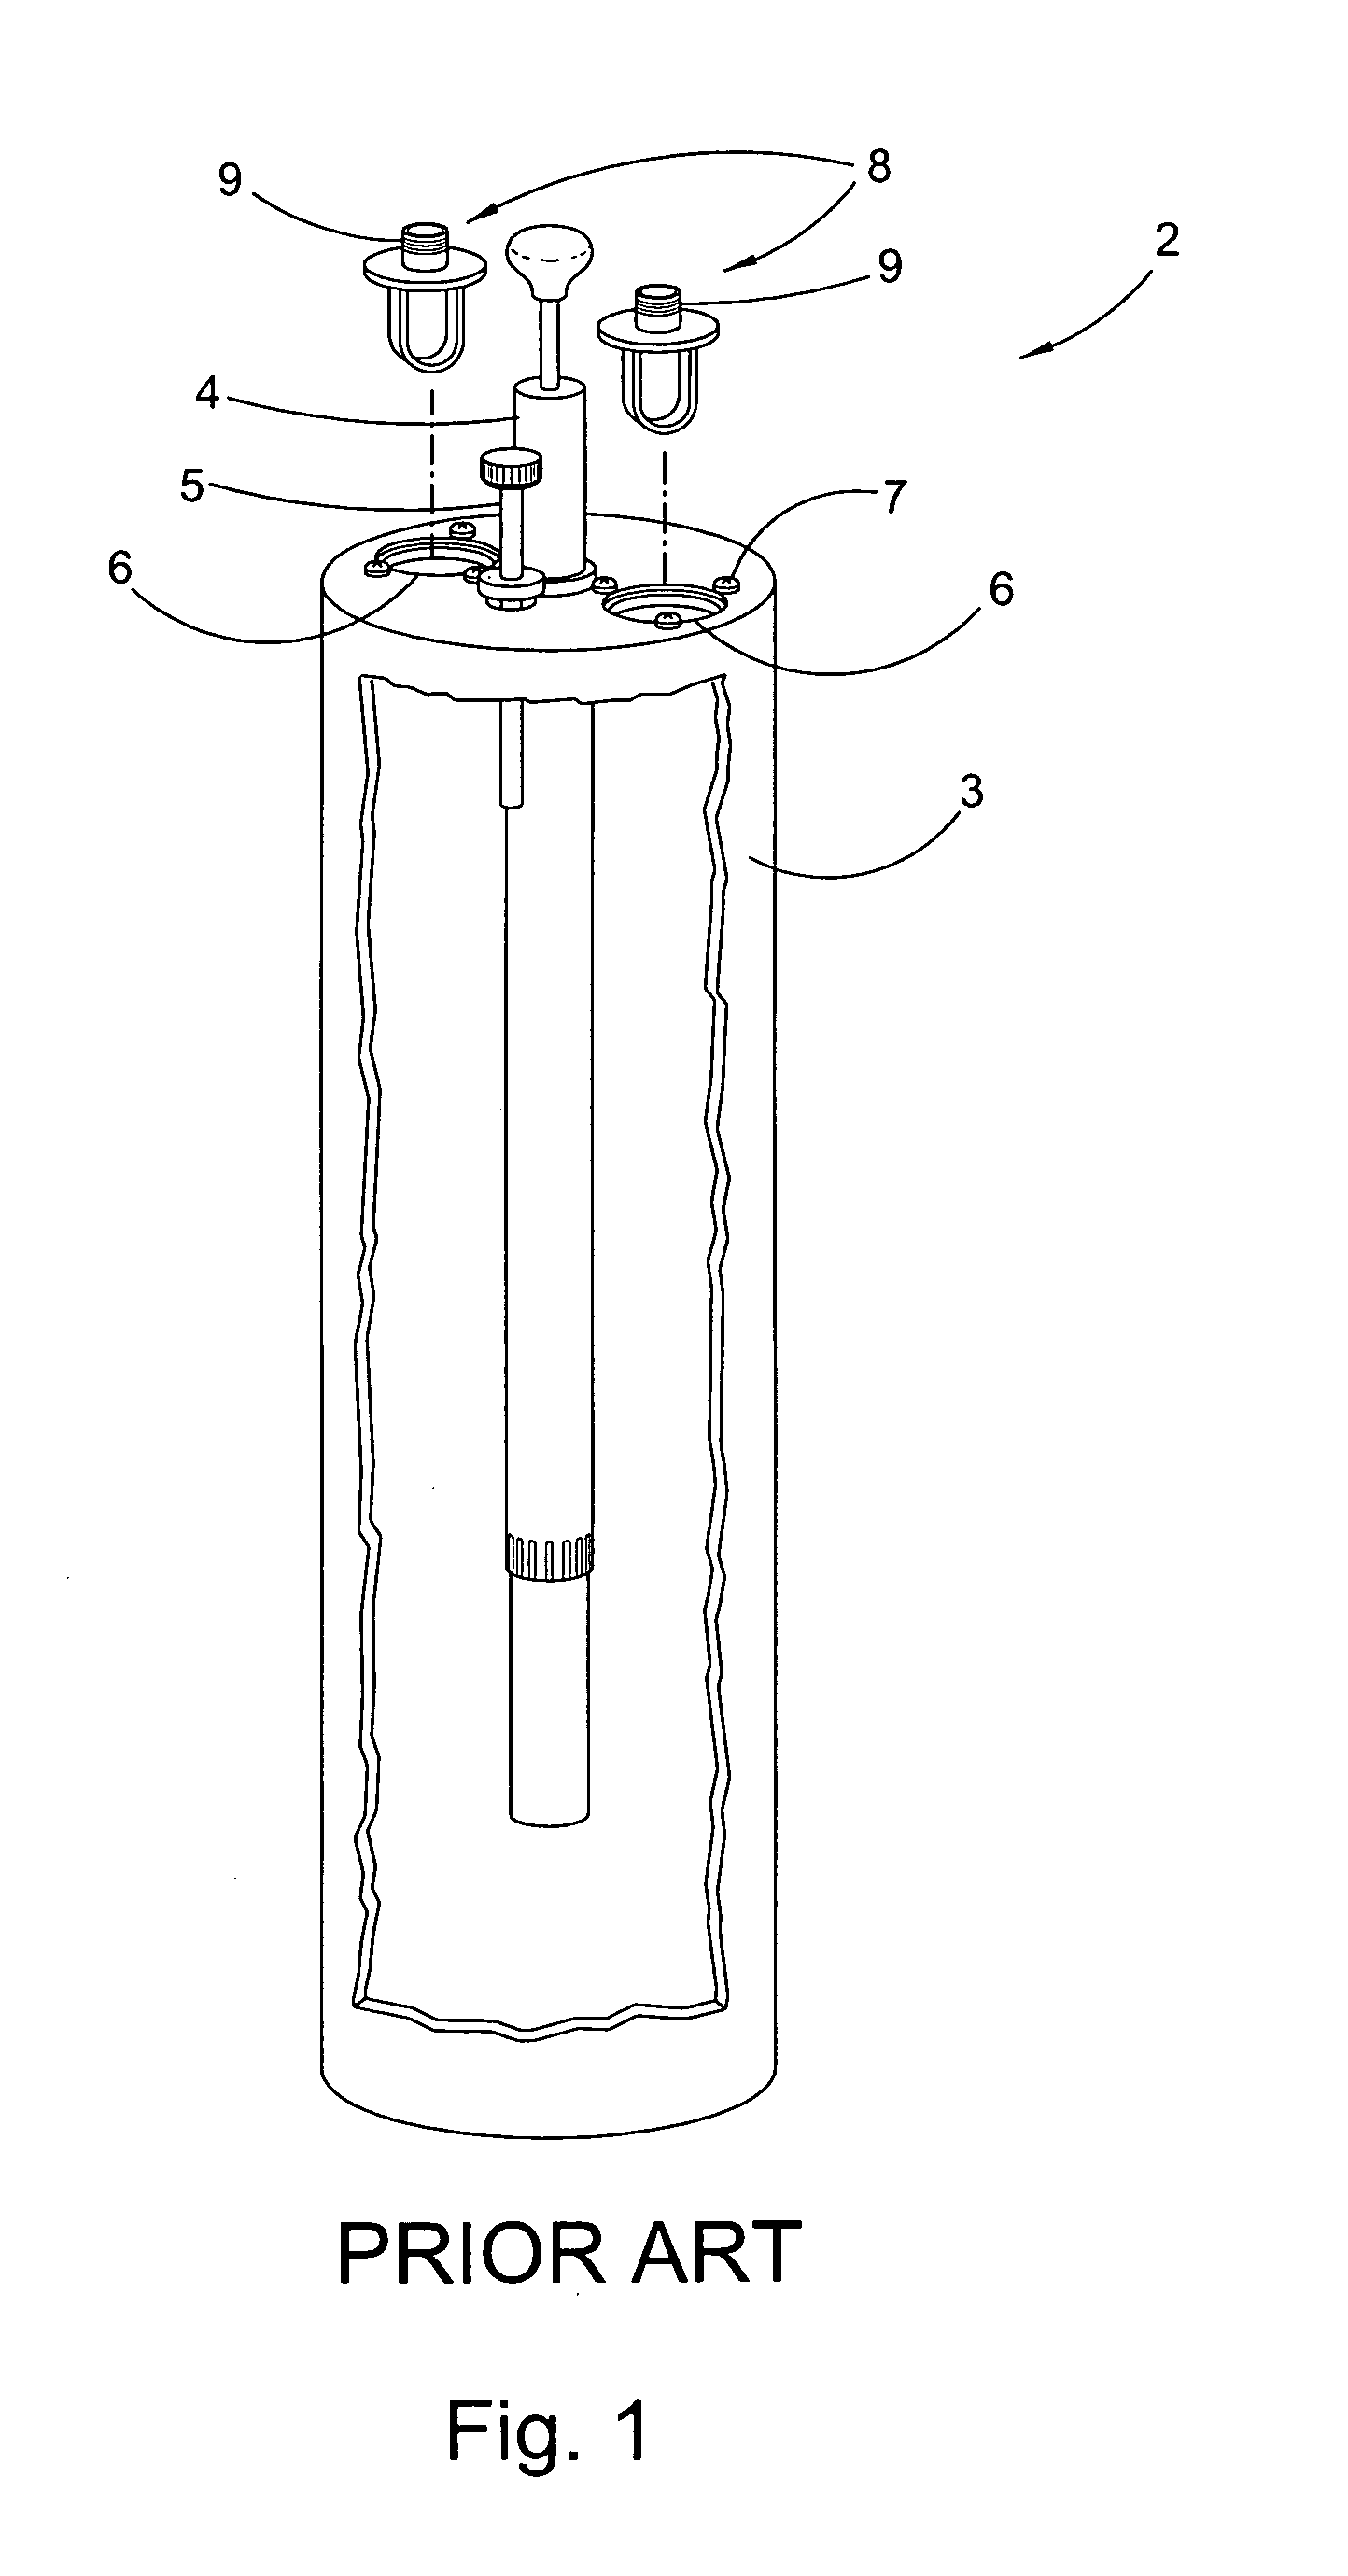 Band pass filter with tunable phase cancellation circuit